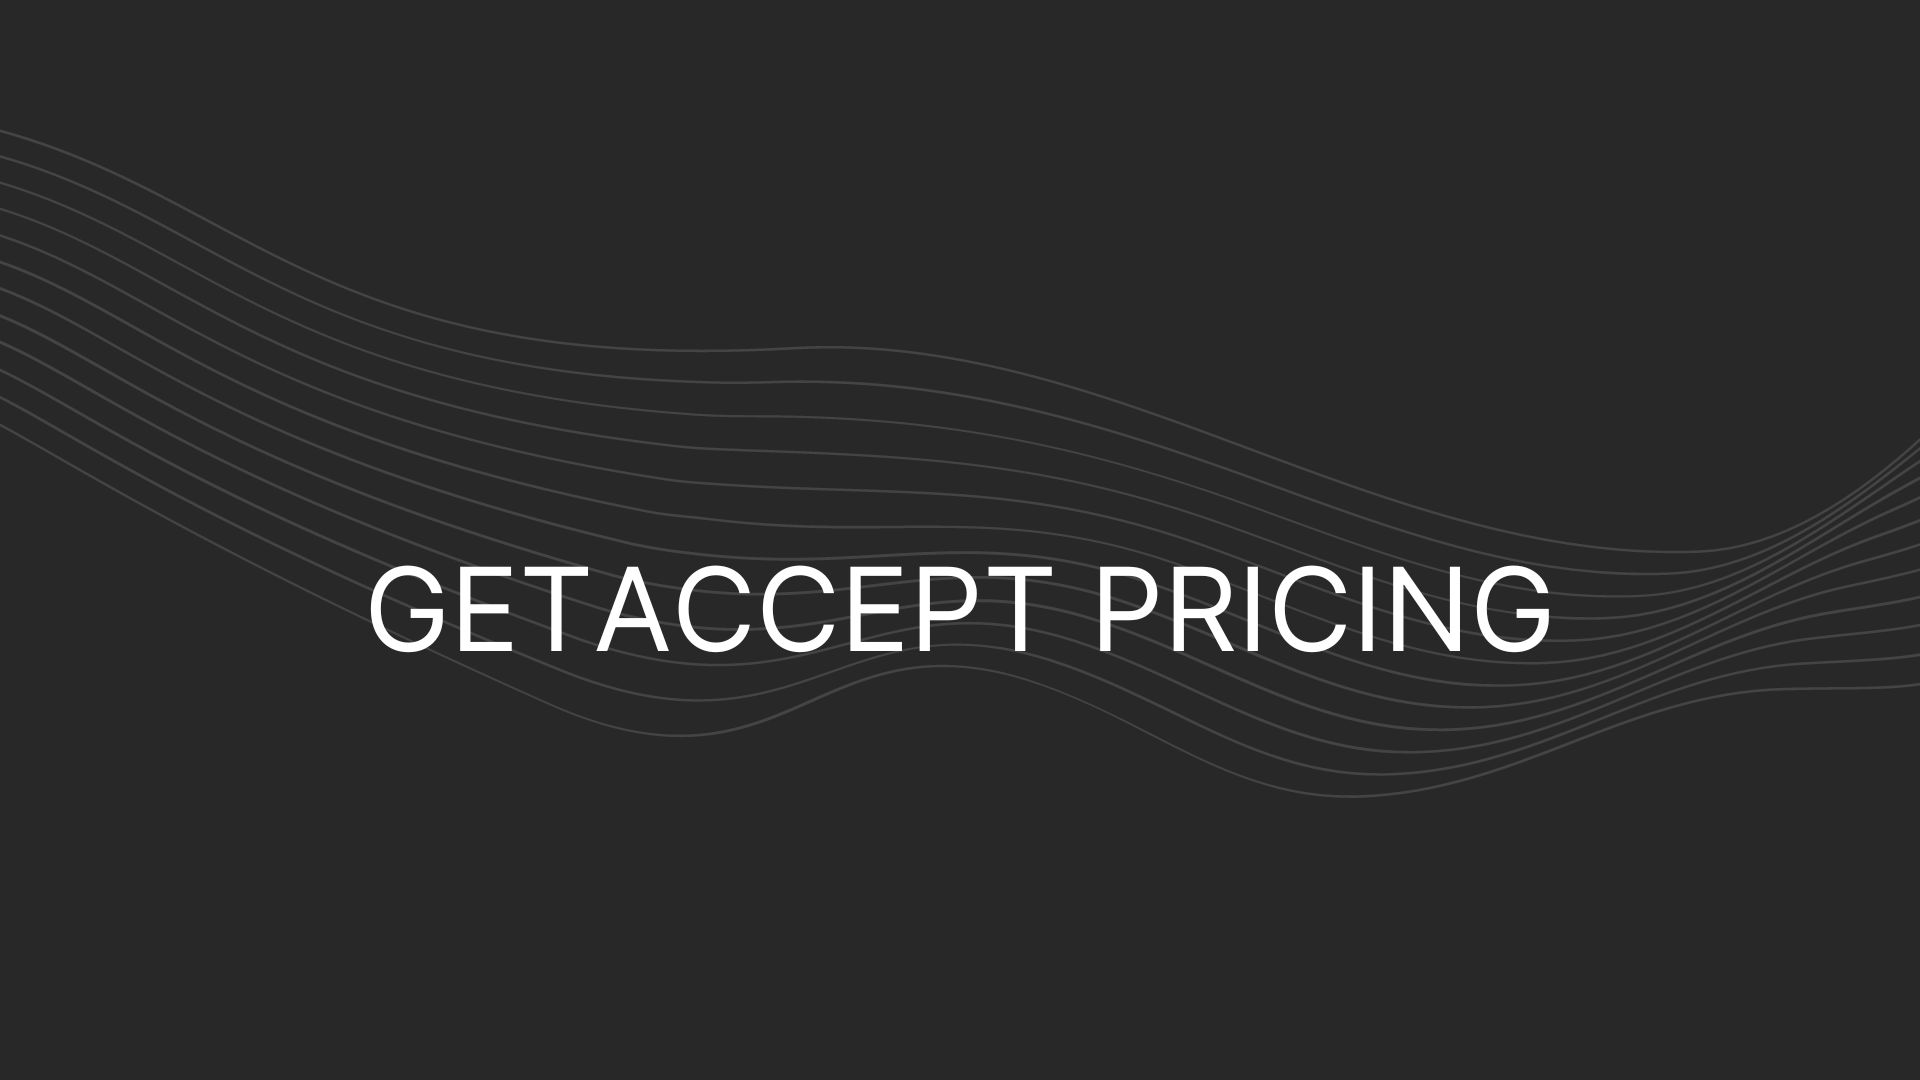 GetAccept Pricing